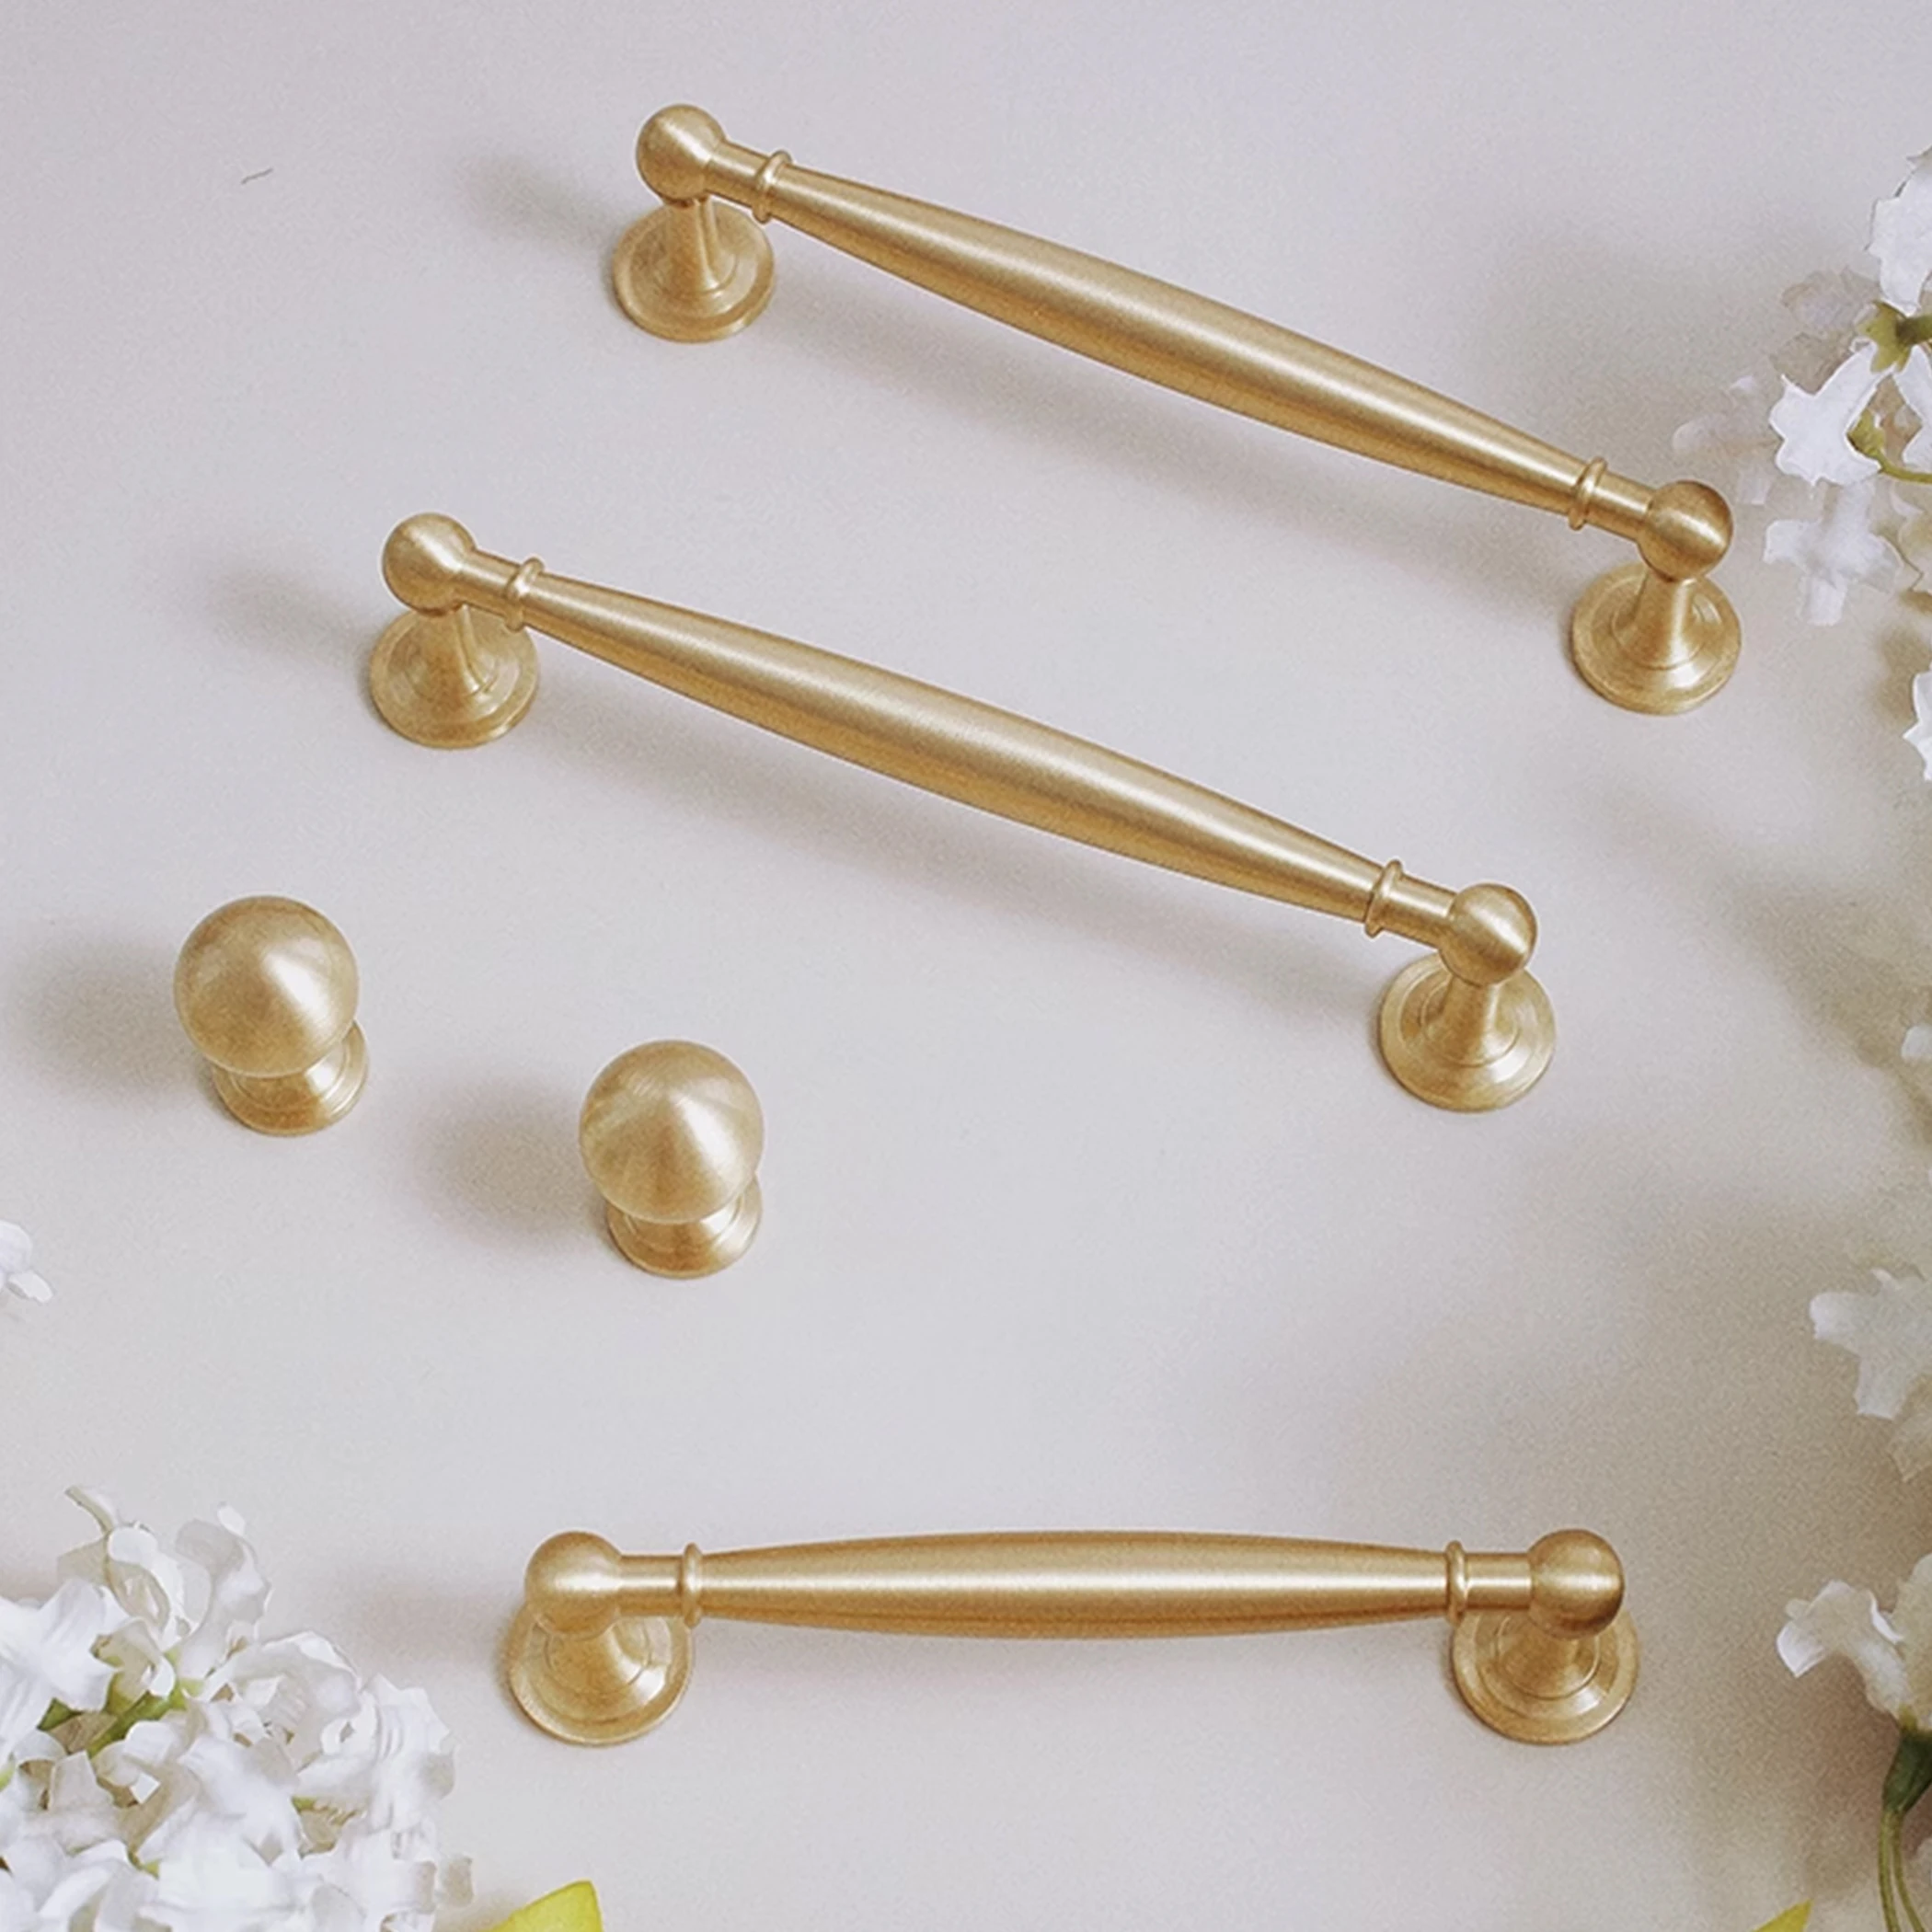 MFYS Solid Brass Cabinet Handles and Knobs Gold Round Single Hole Drawer Knob Light Luxury Wardrobe Pulls Furniture Hardware